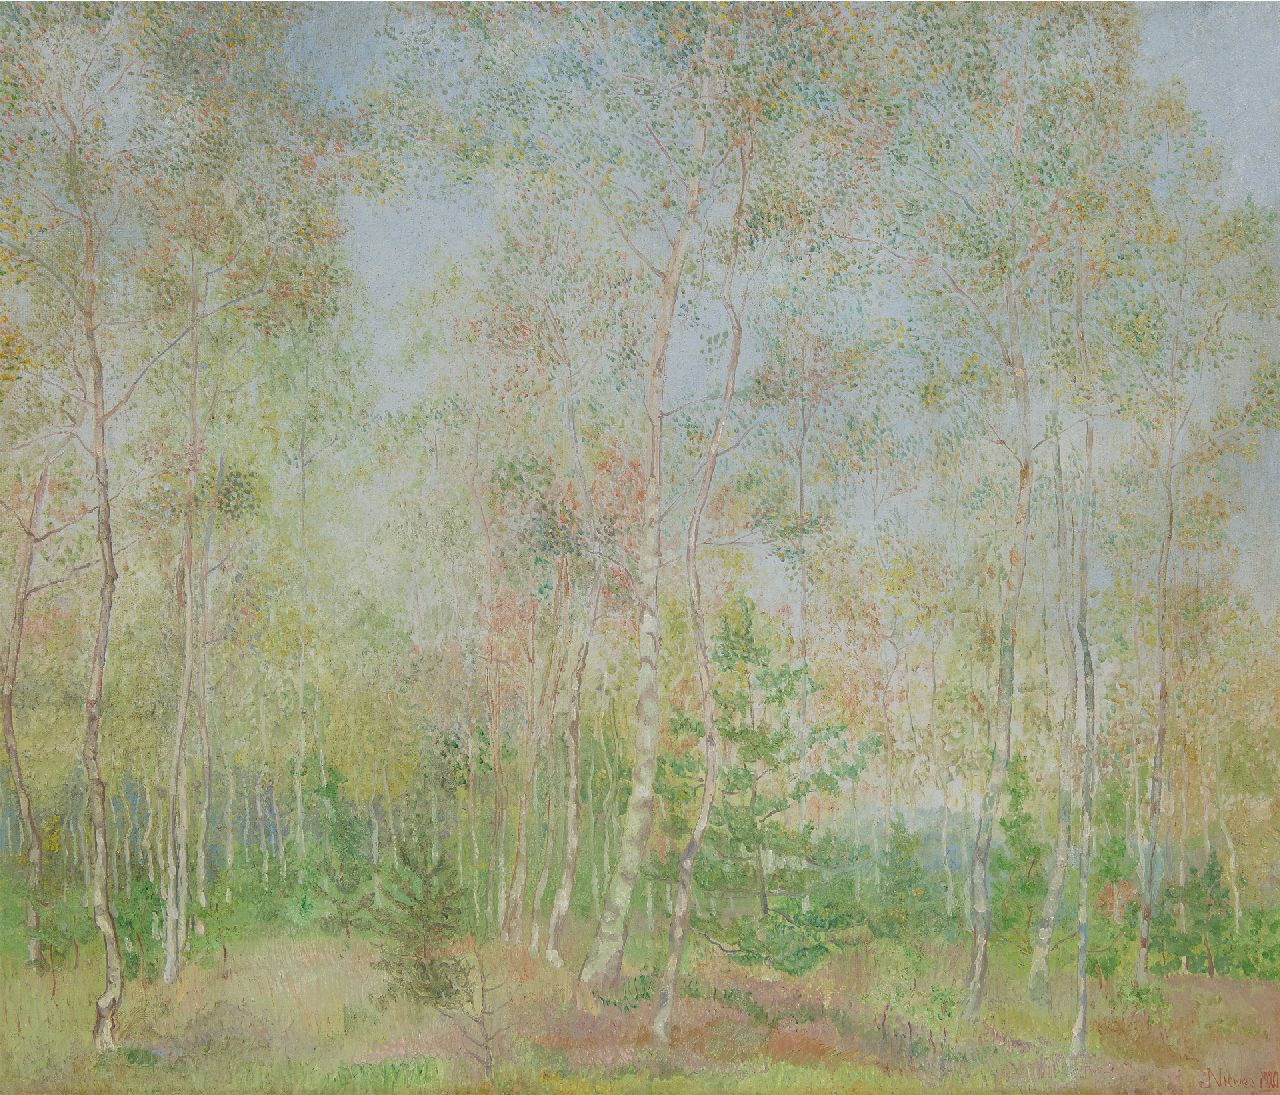 Nieweg J.  | Jakob Nieweg | Paintings offered for sale | Birch trees, oil on canvas 60.3 x 70.7 cm, signed l.r. and dated 1920